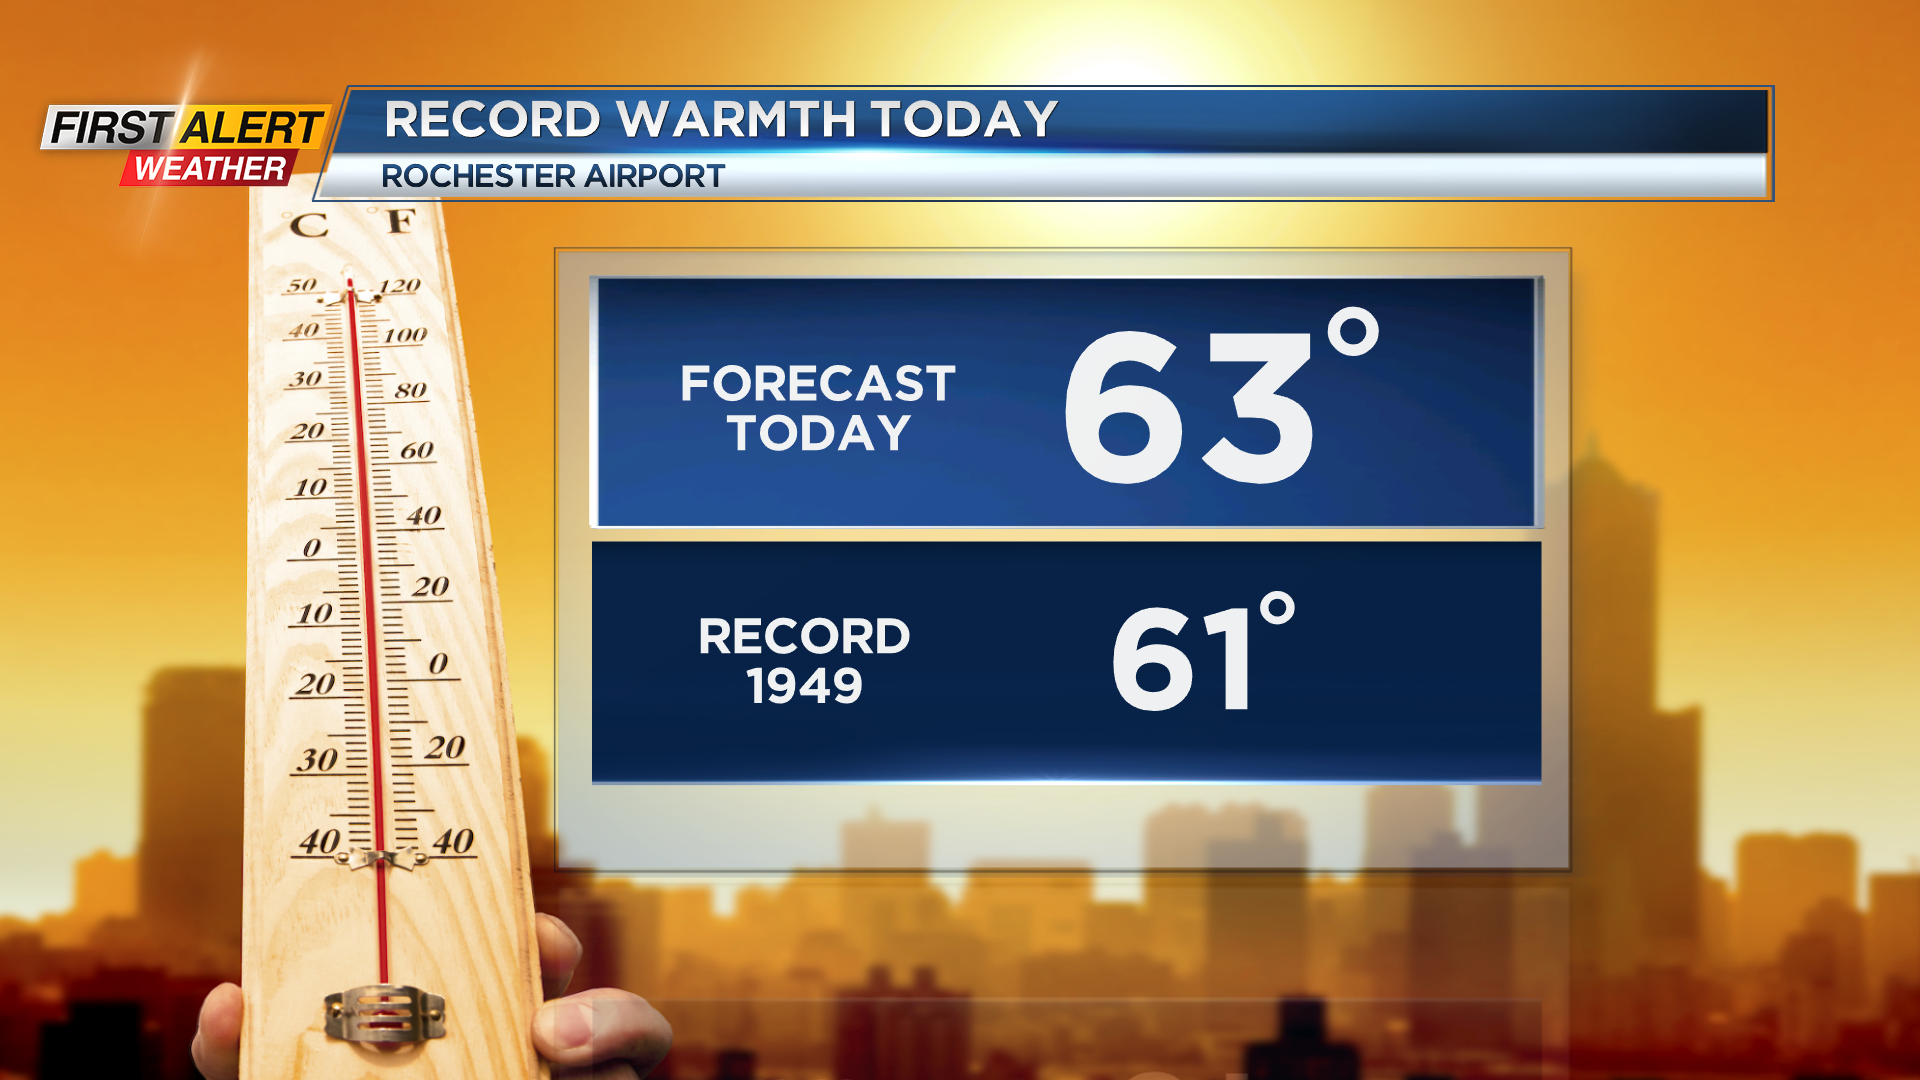 First Alert Weather Record warmth on the way for Wednesday with strong